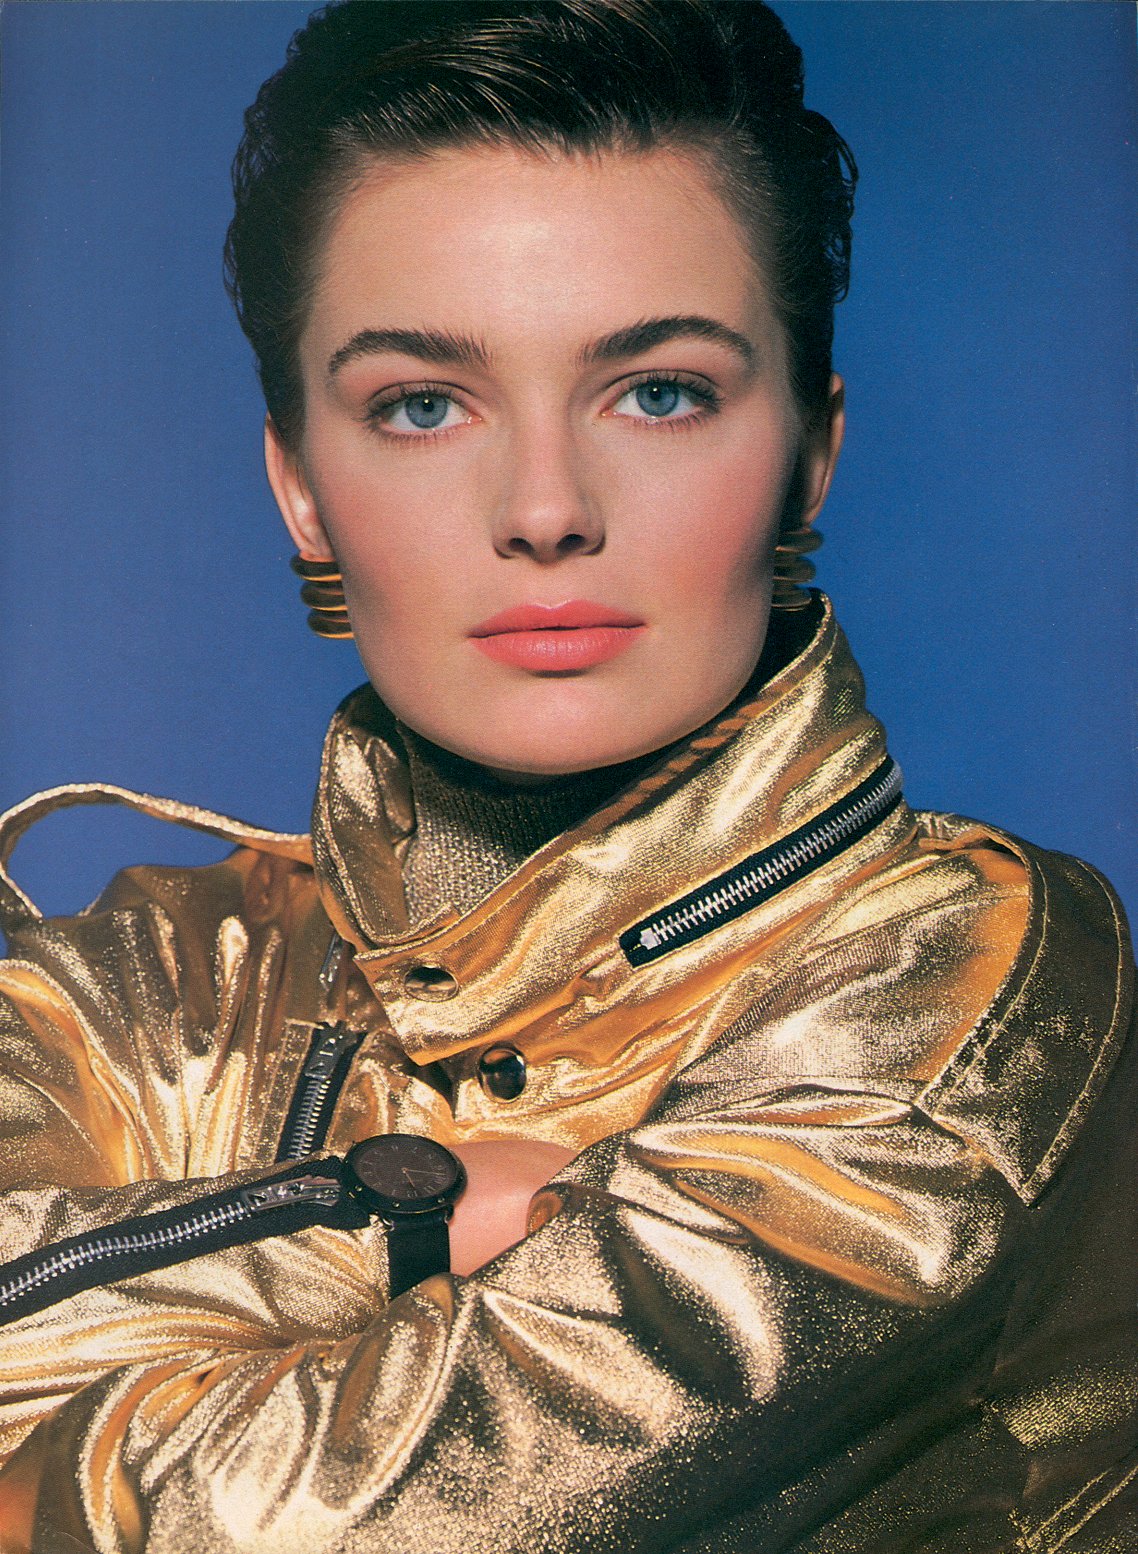 Fashion Store and Models: Paulina Porizkova wallpapers, Pictures, Biography ...1138 x 1554